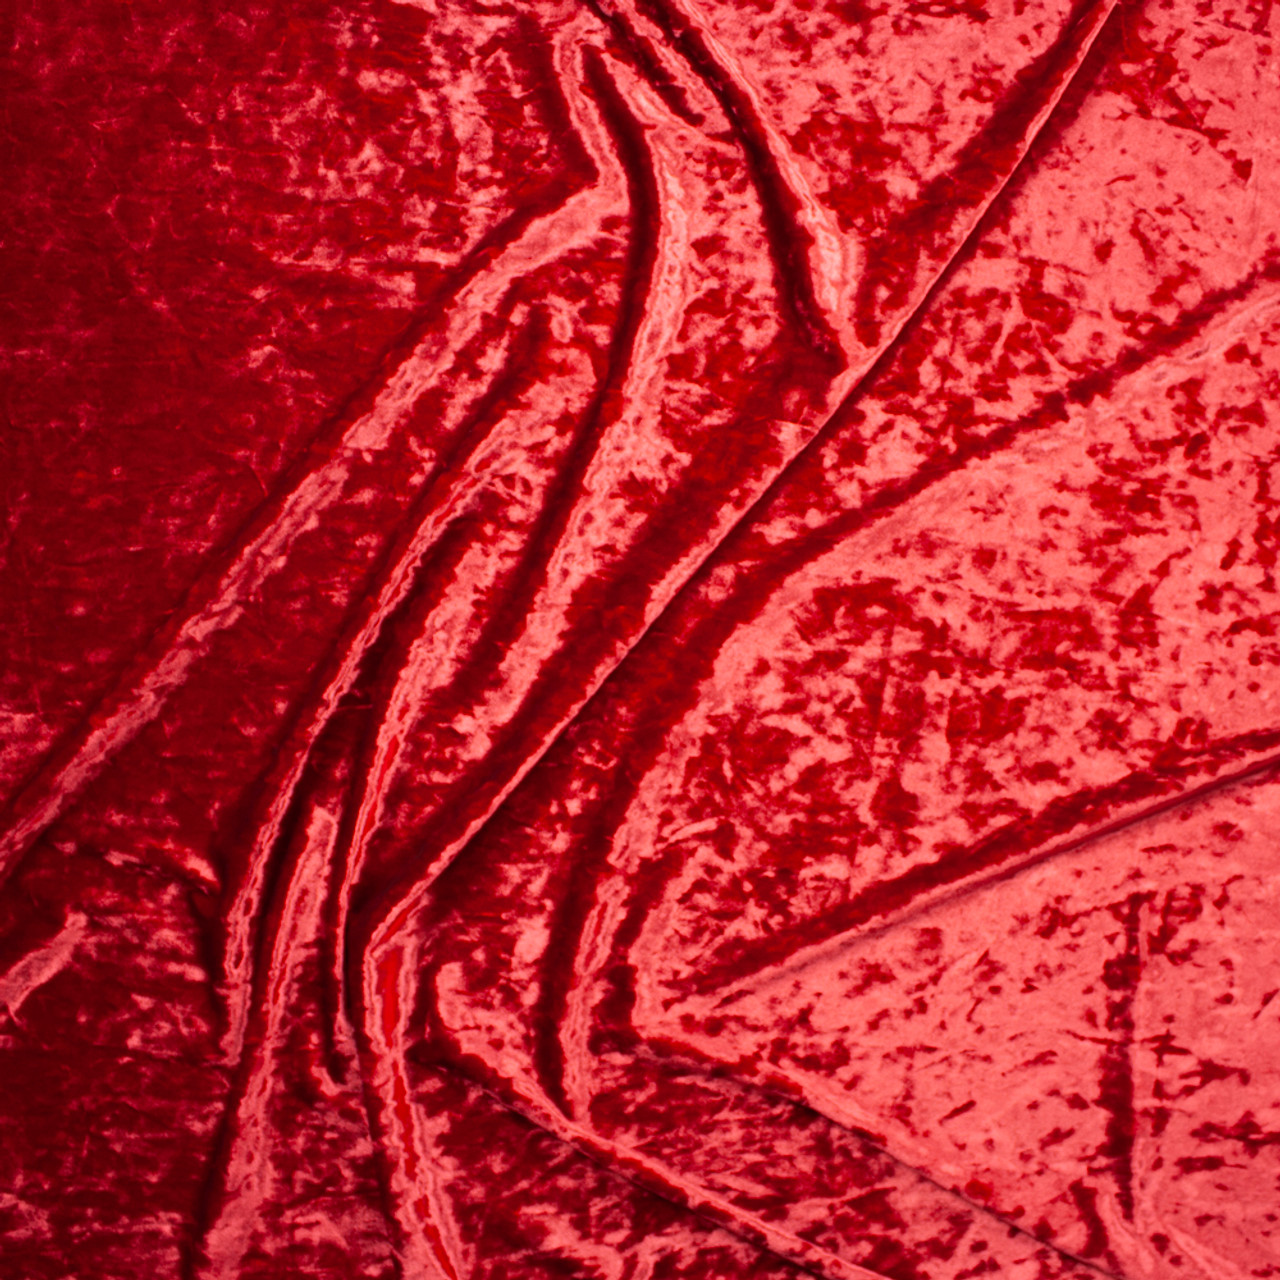 Red Crushed Velvet Velour Stretch Fabric Material - Polyester - 150cm (59)  wide